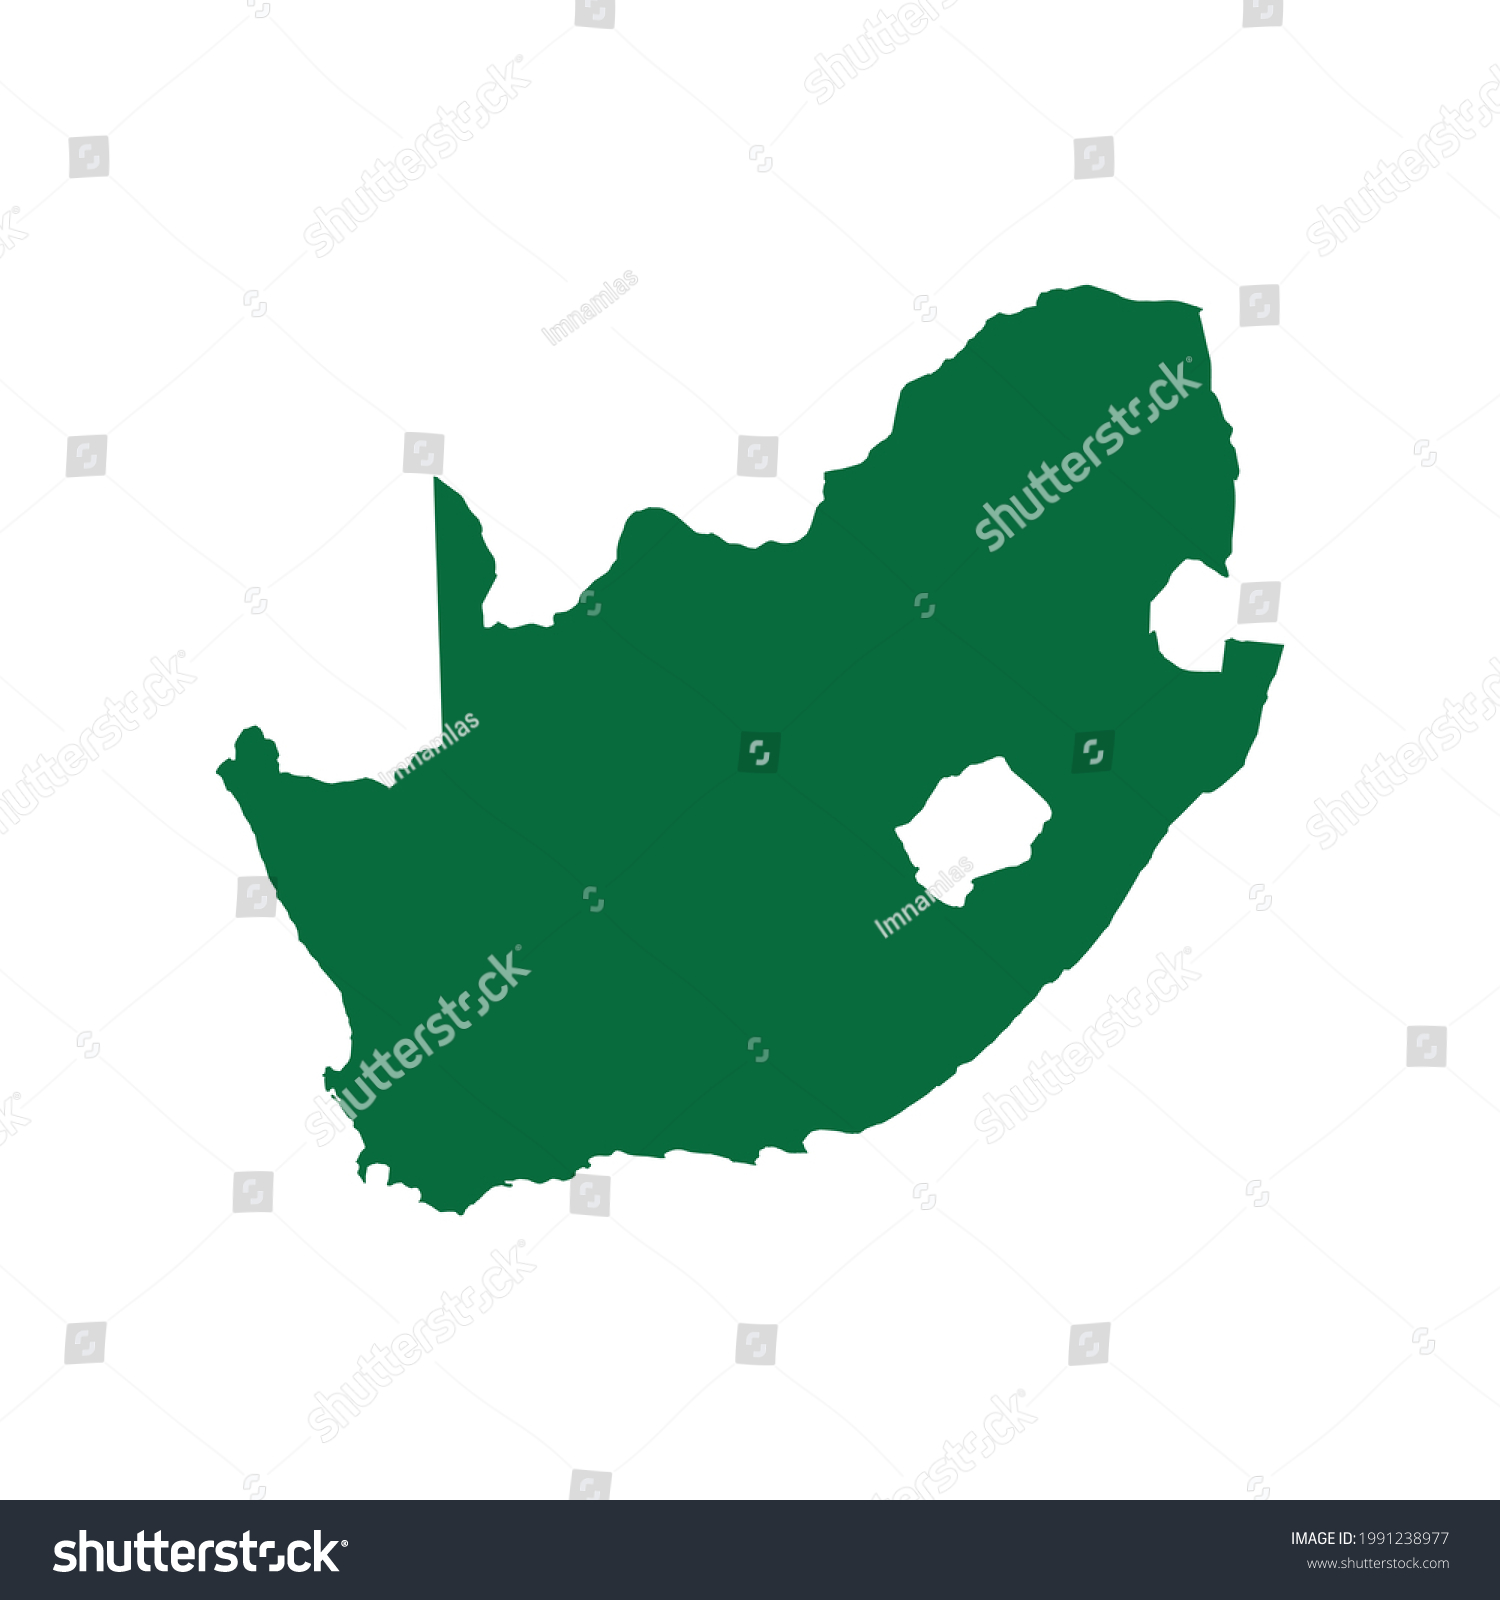 South Africa Map South Africa Map Stock Vector Royalty Free 1991238977 Shutterstock 1210